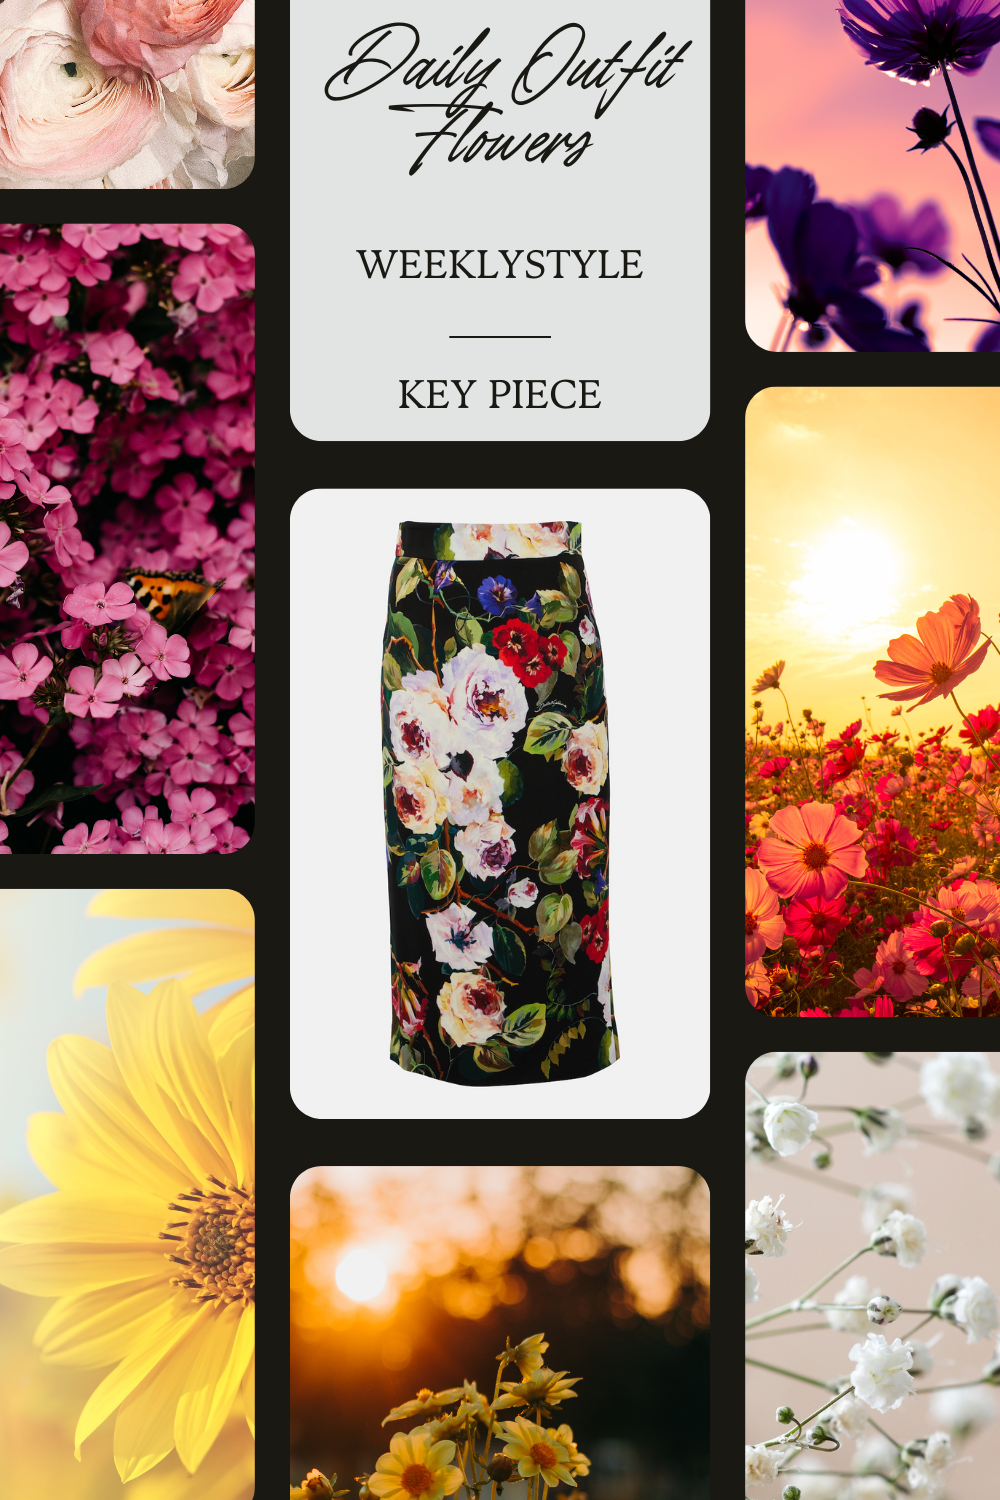 Daily Outfit – Flowers